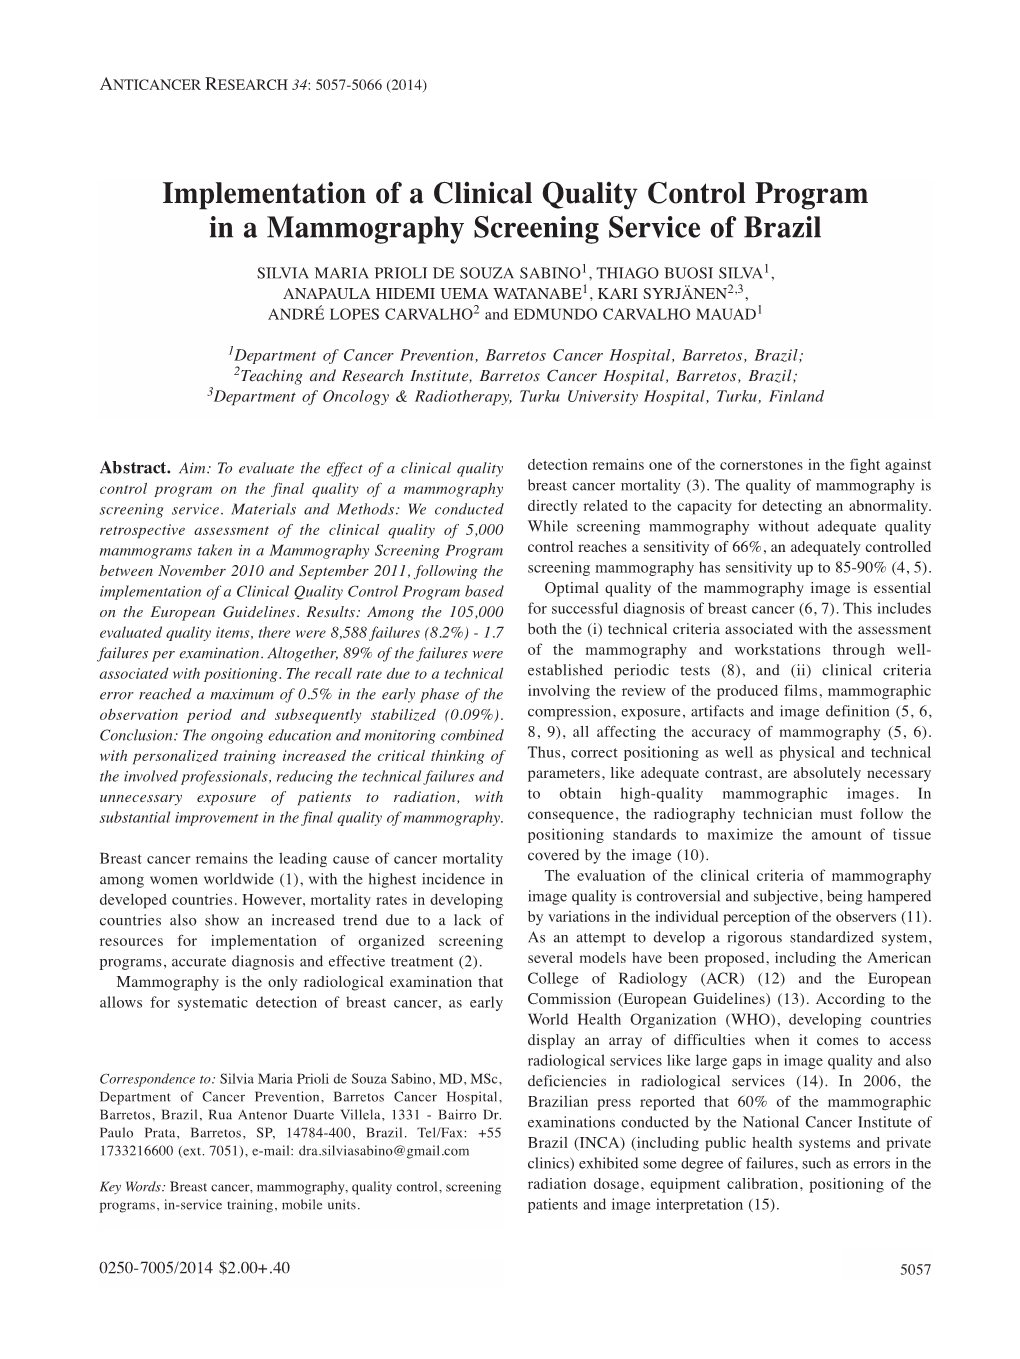 Implementation of a Clinical Quality Control Program in a Mammography Screening Service of Brazil